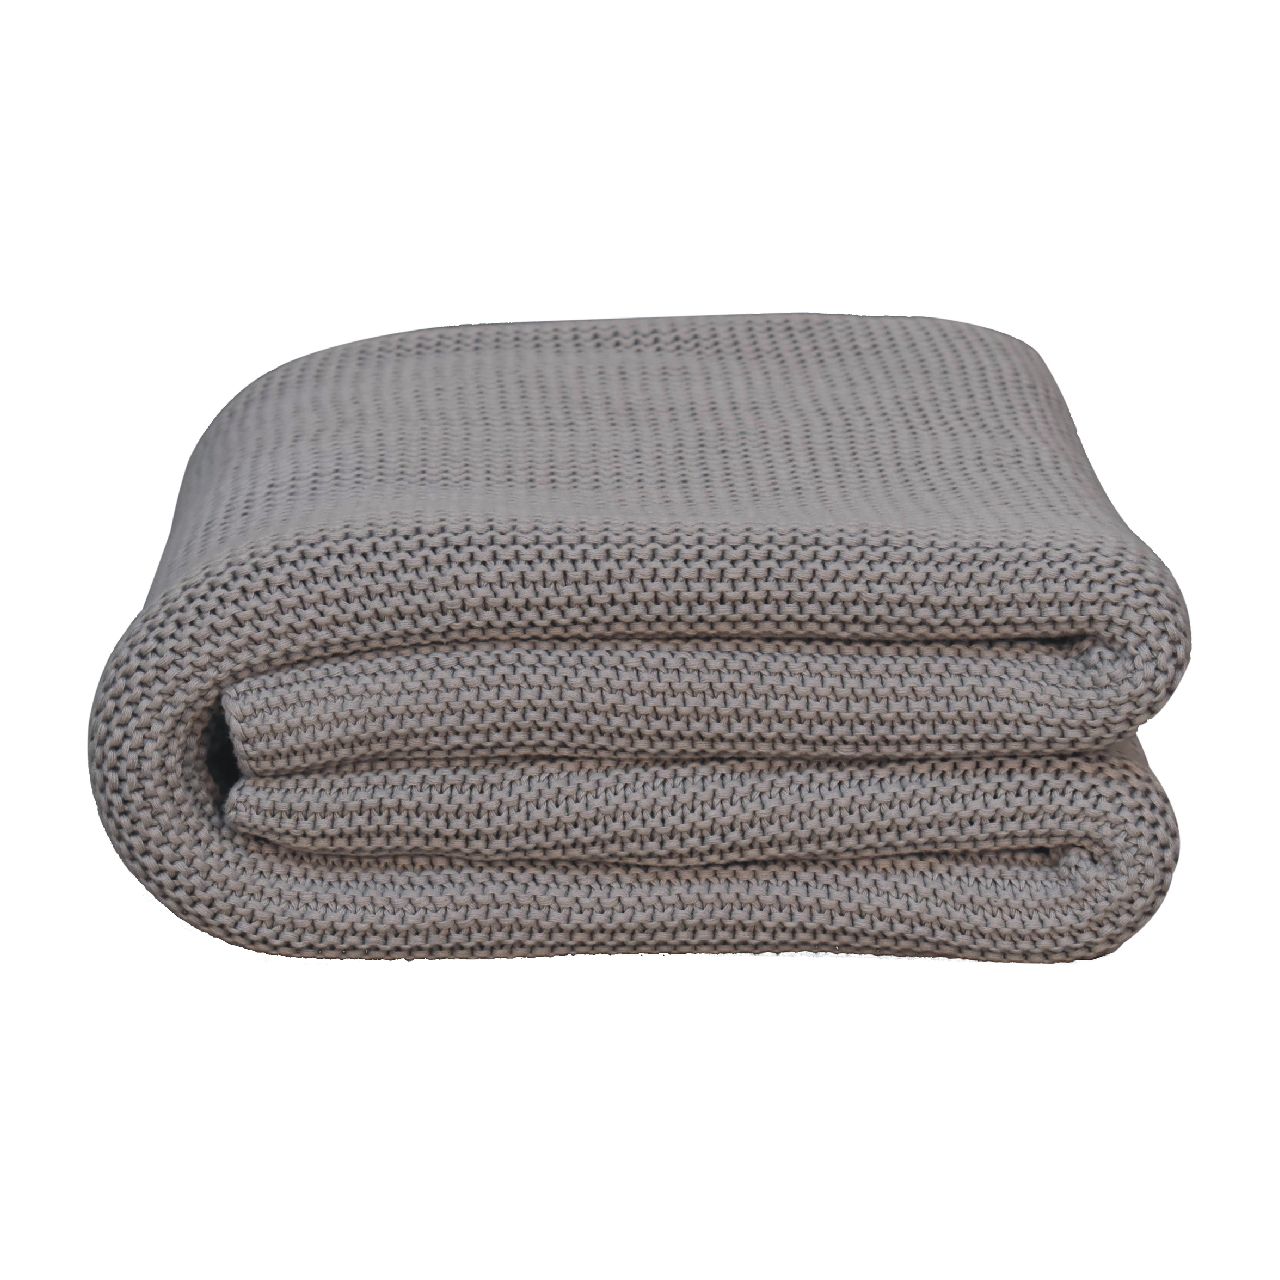 Double Grey Knitted Throw